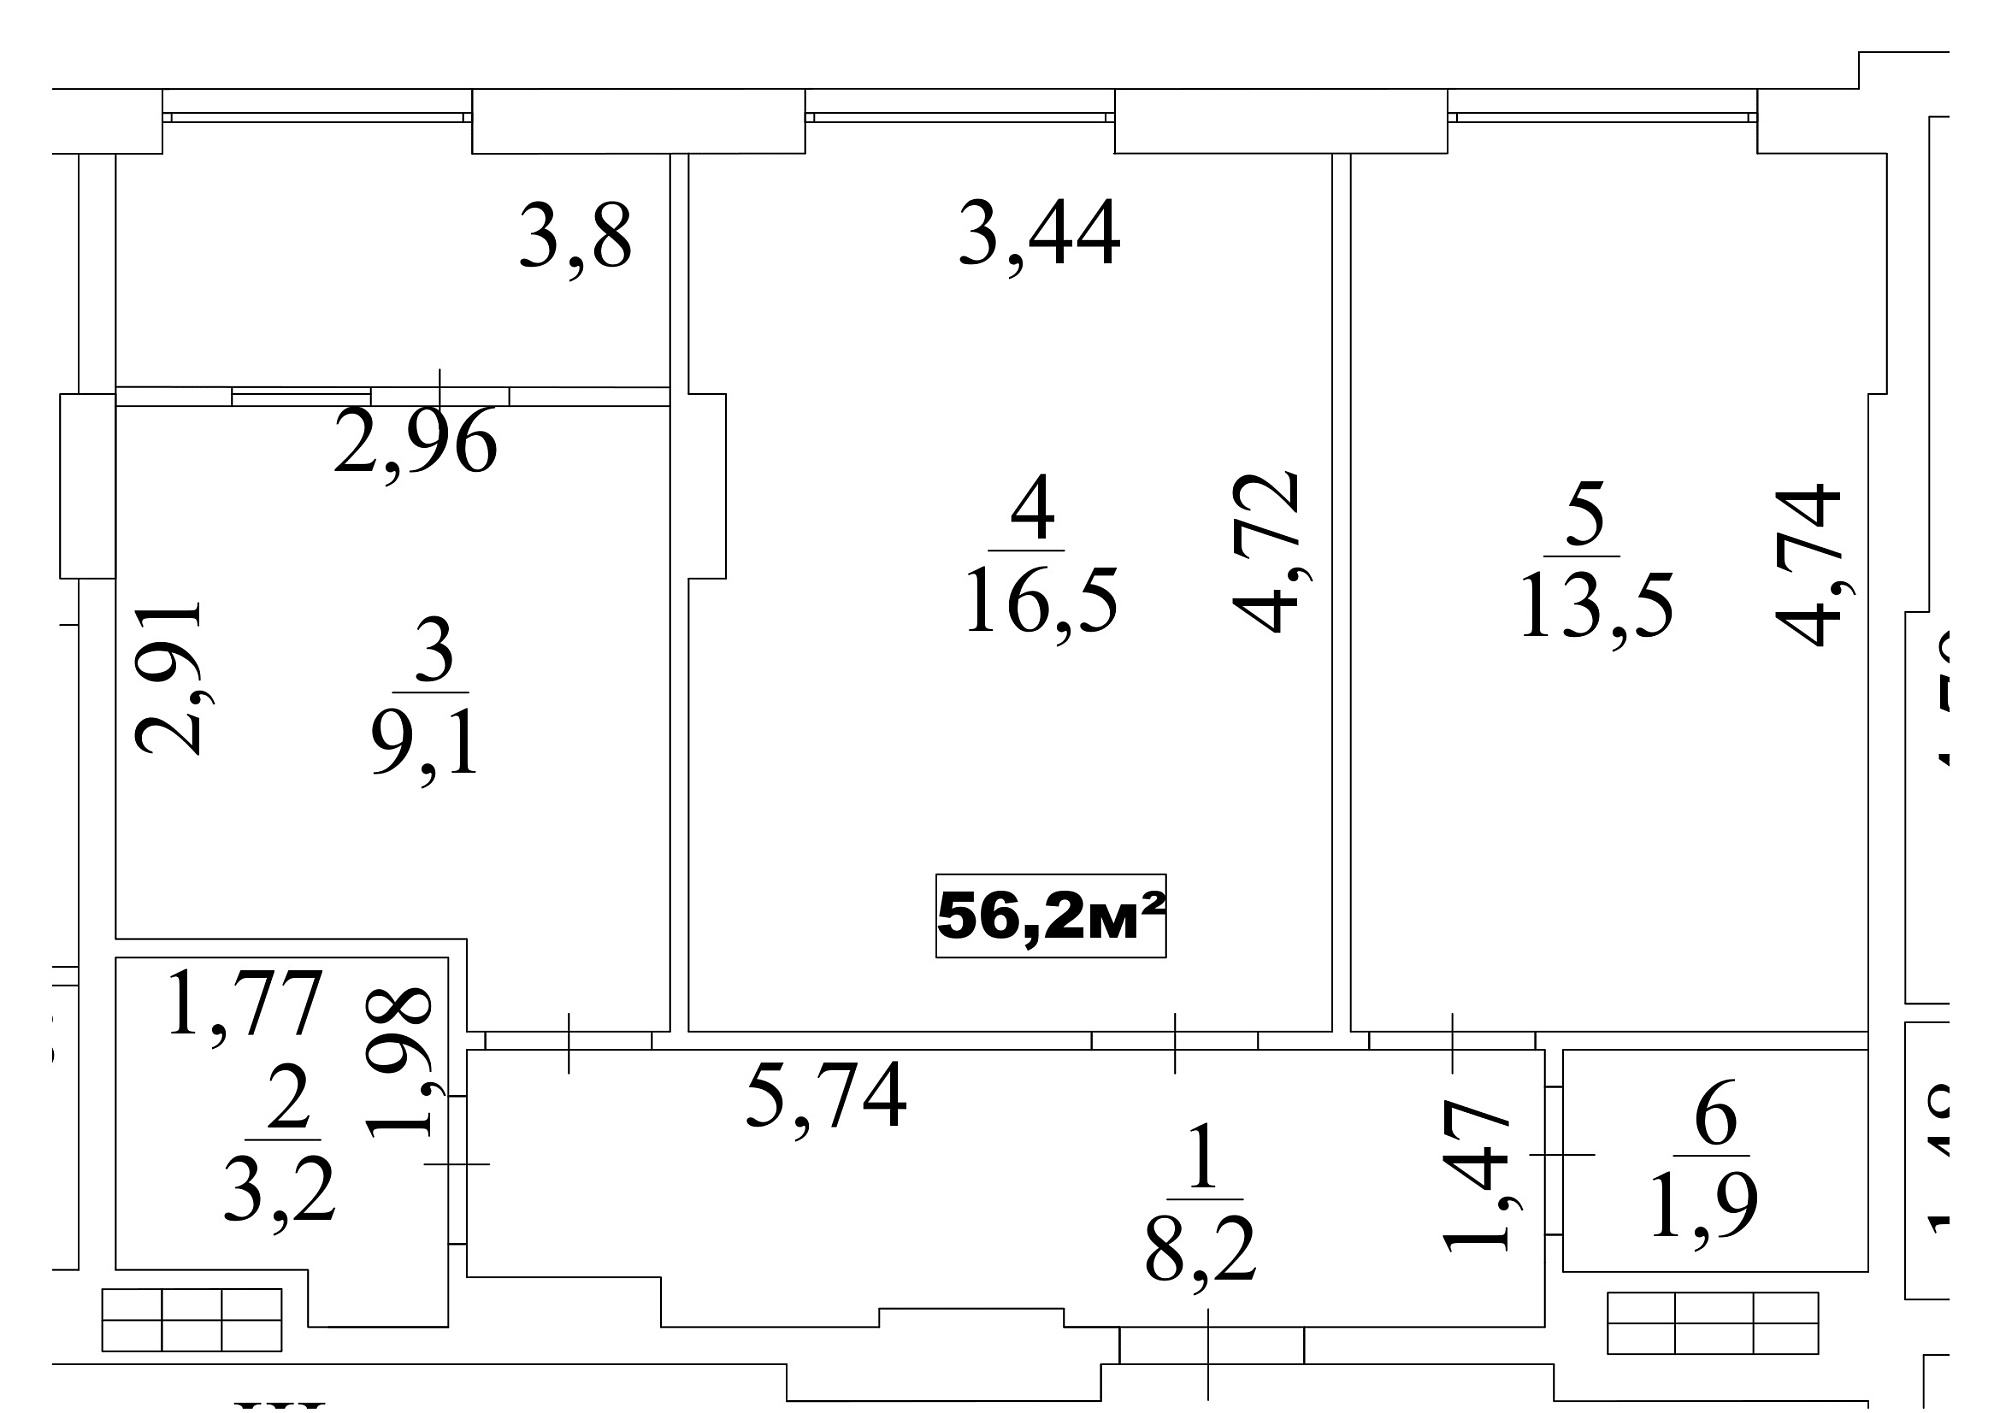 Planning 2-rm flats area 56.2m2, AB-10-04/00031.